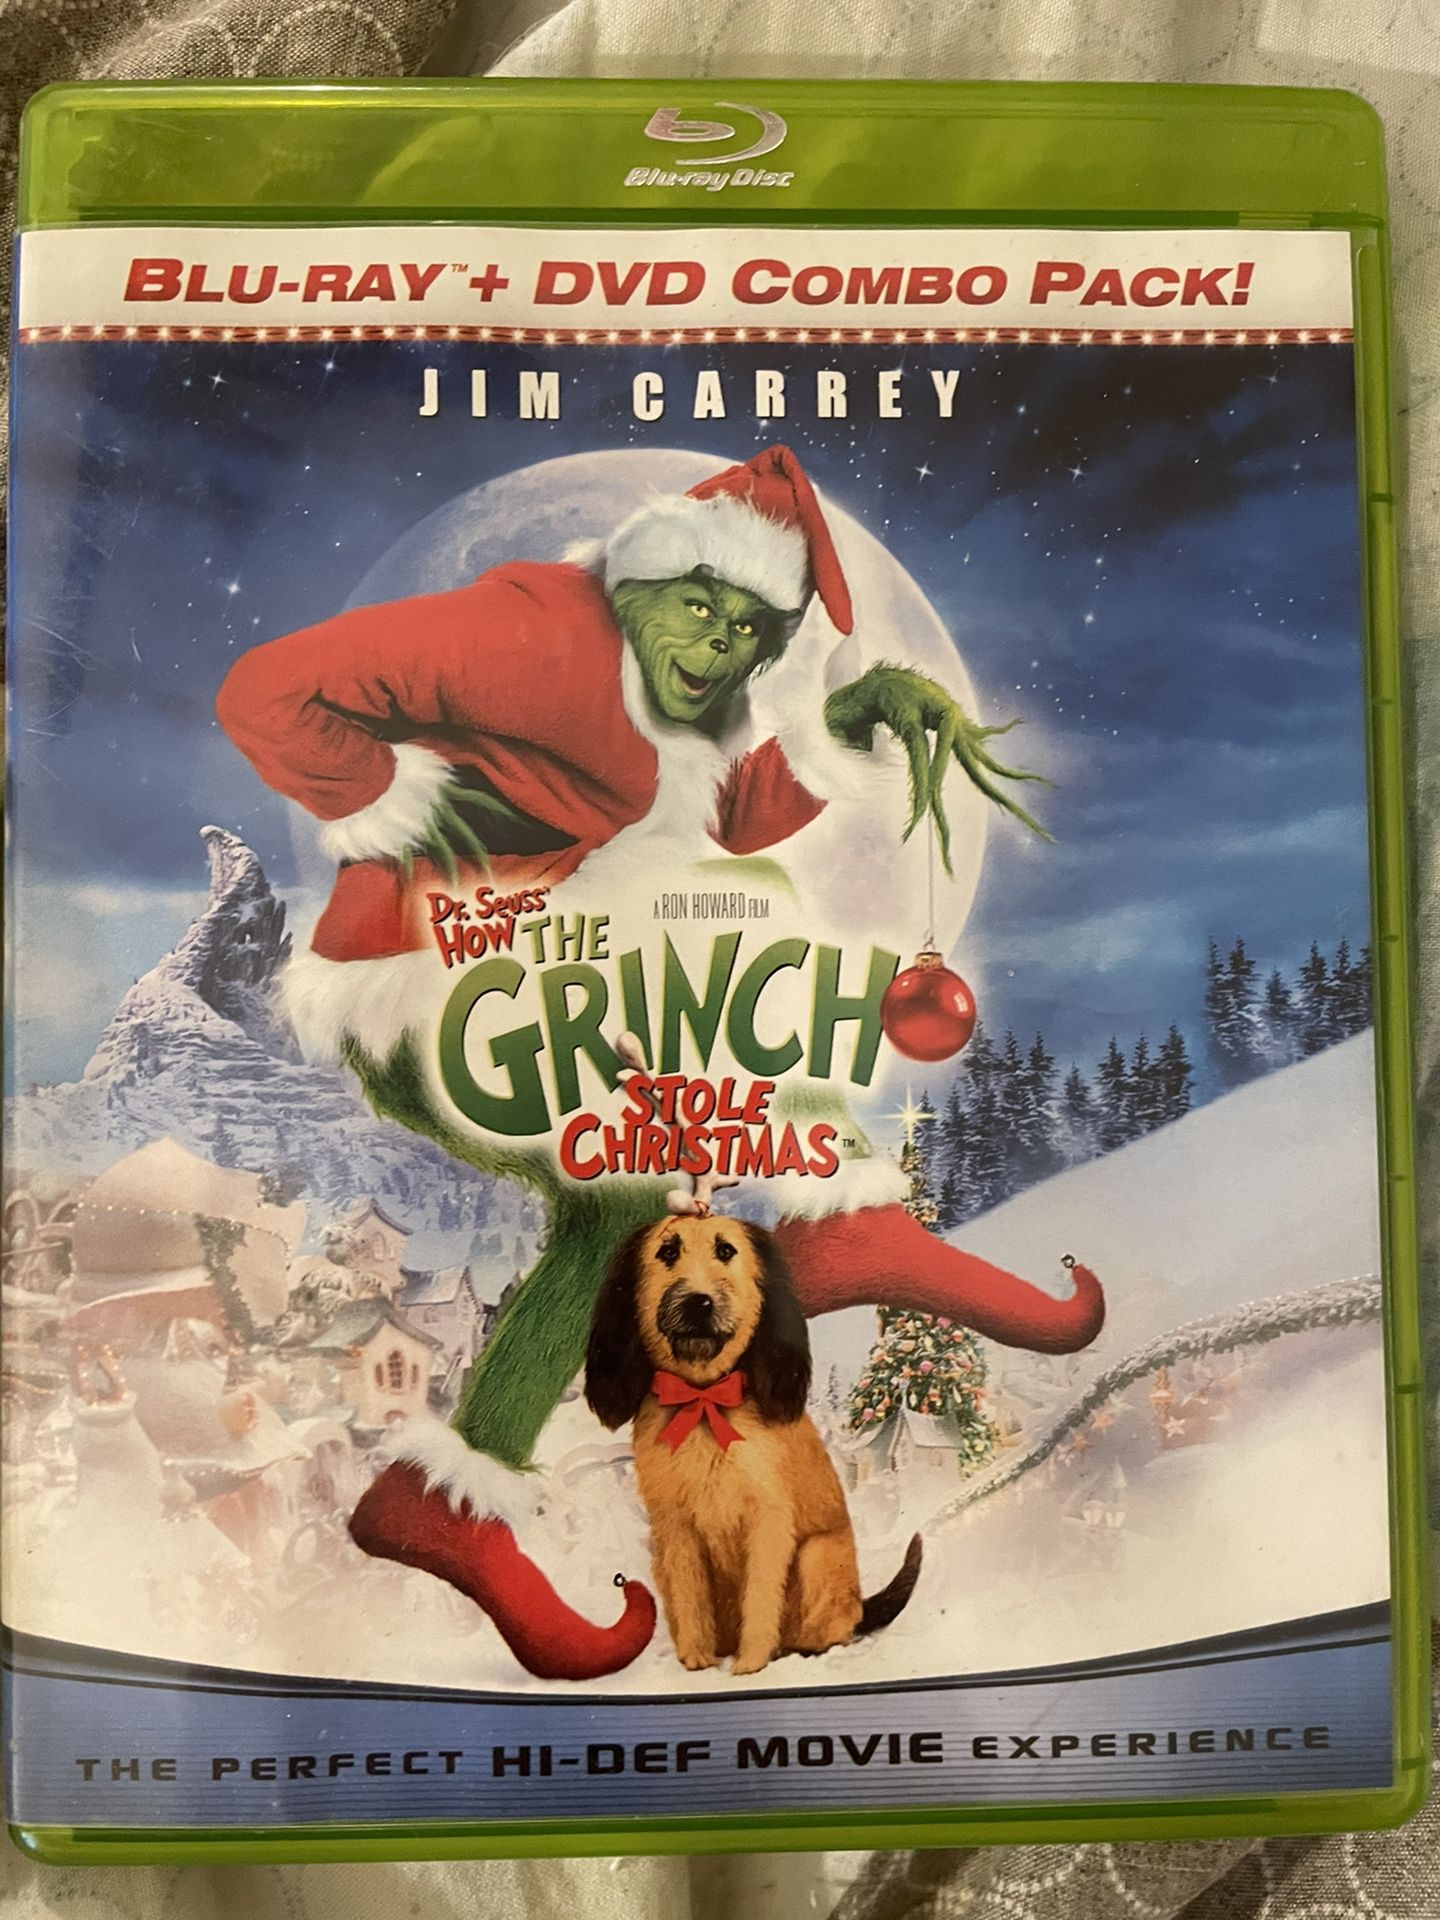 HOW THE GRINCH STOLE CHRISTMAS (Blu-ray + DVD)